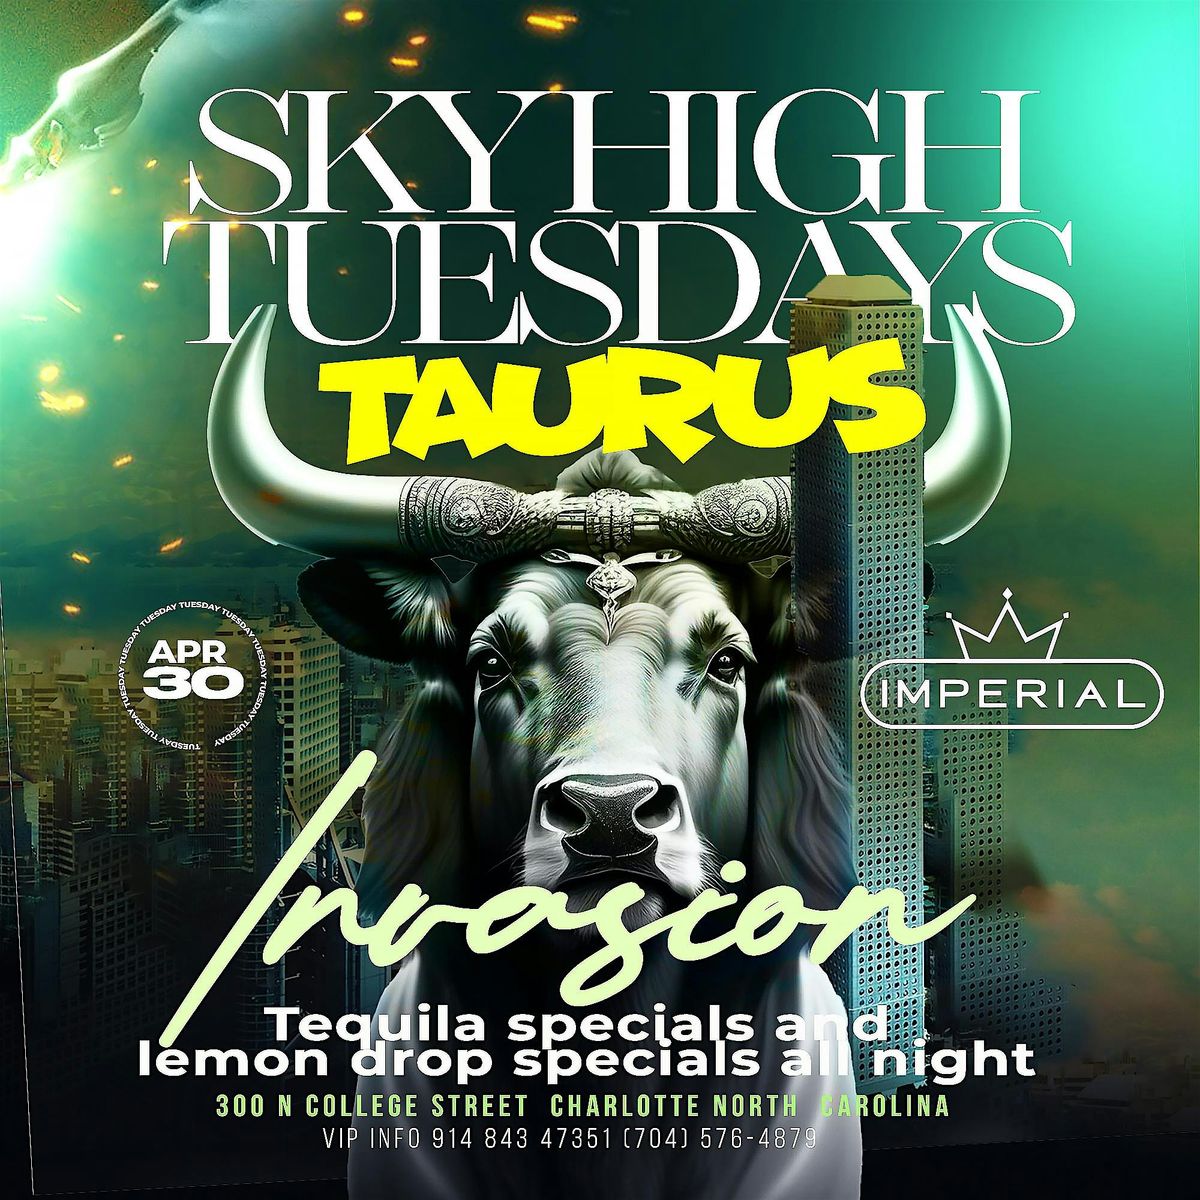 Sky high tueusdays! Taurus invasion rooftop party! $400 2 bottles! And more specials!